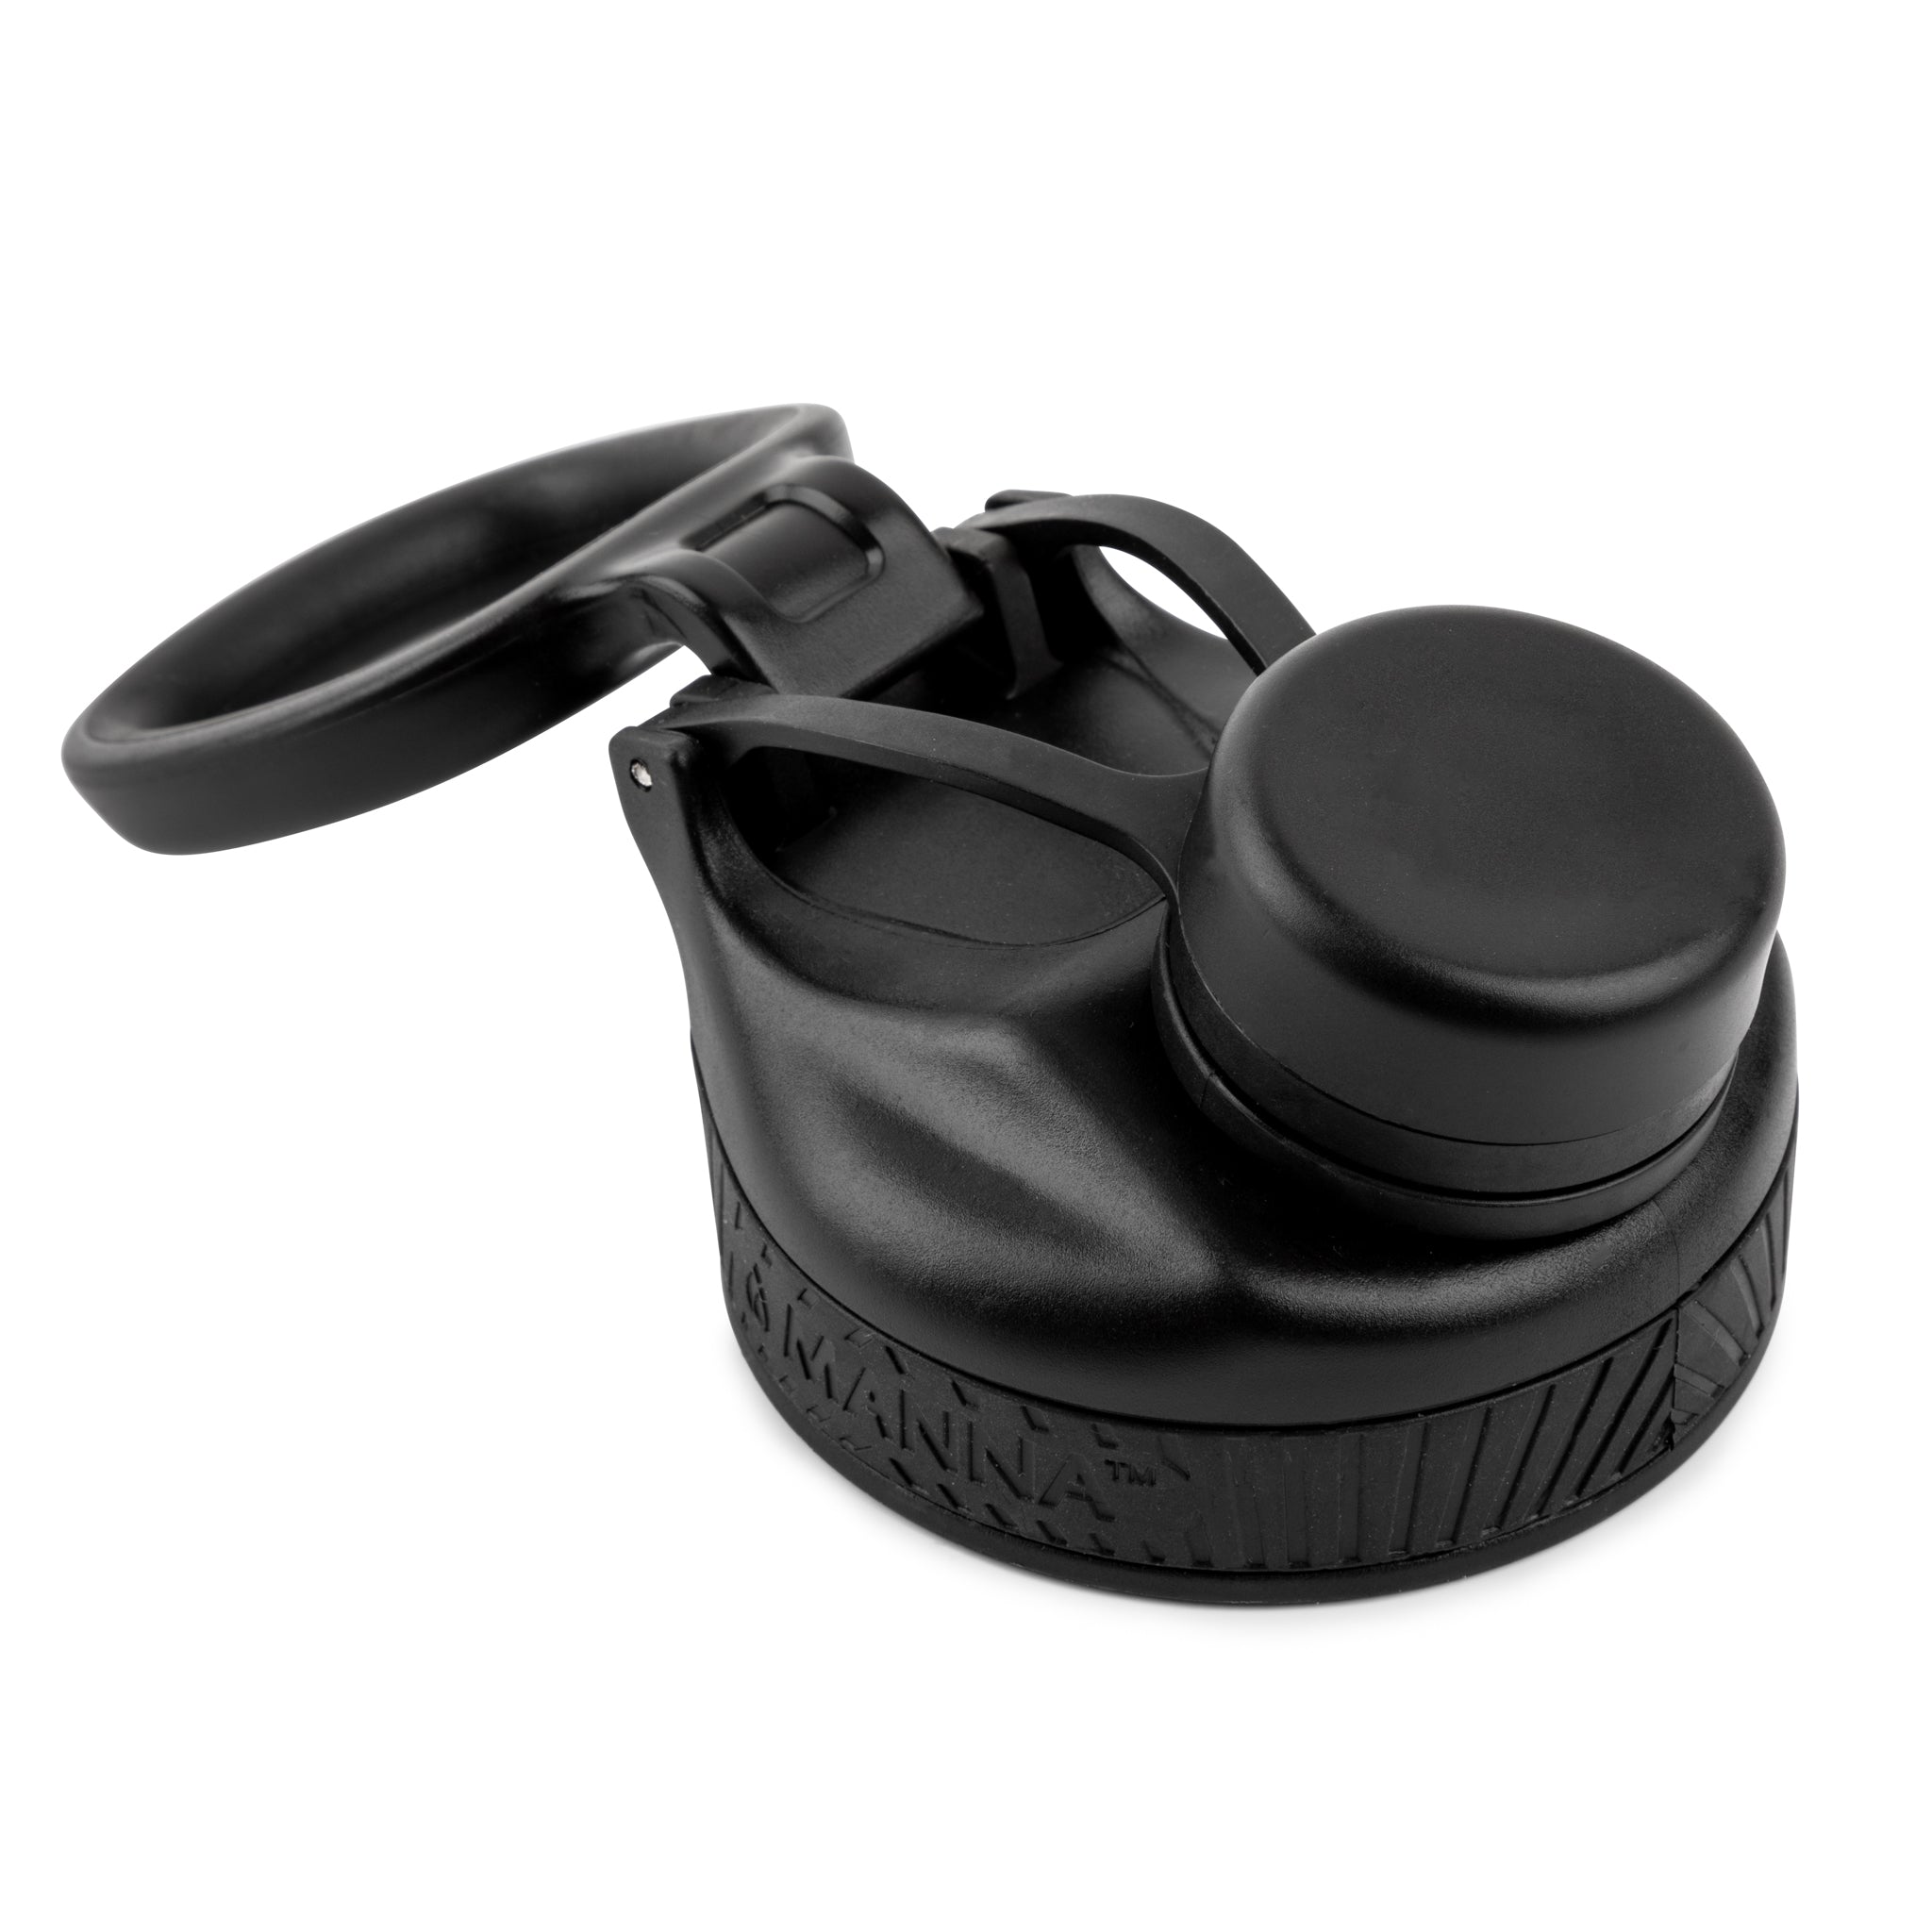 Hydro PRO Lid 2PK, Reduce Everyday Replacement Parts